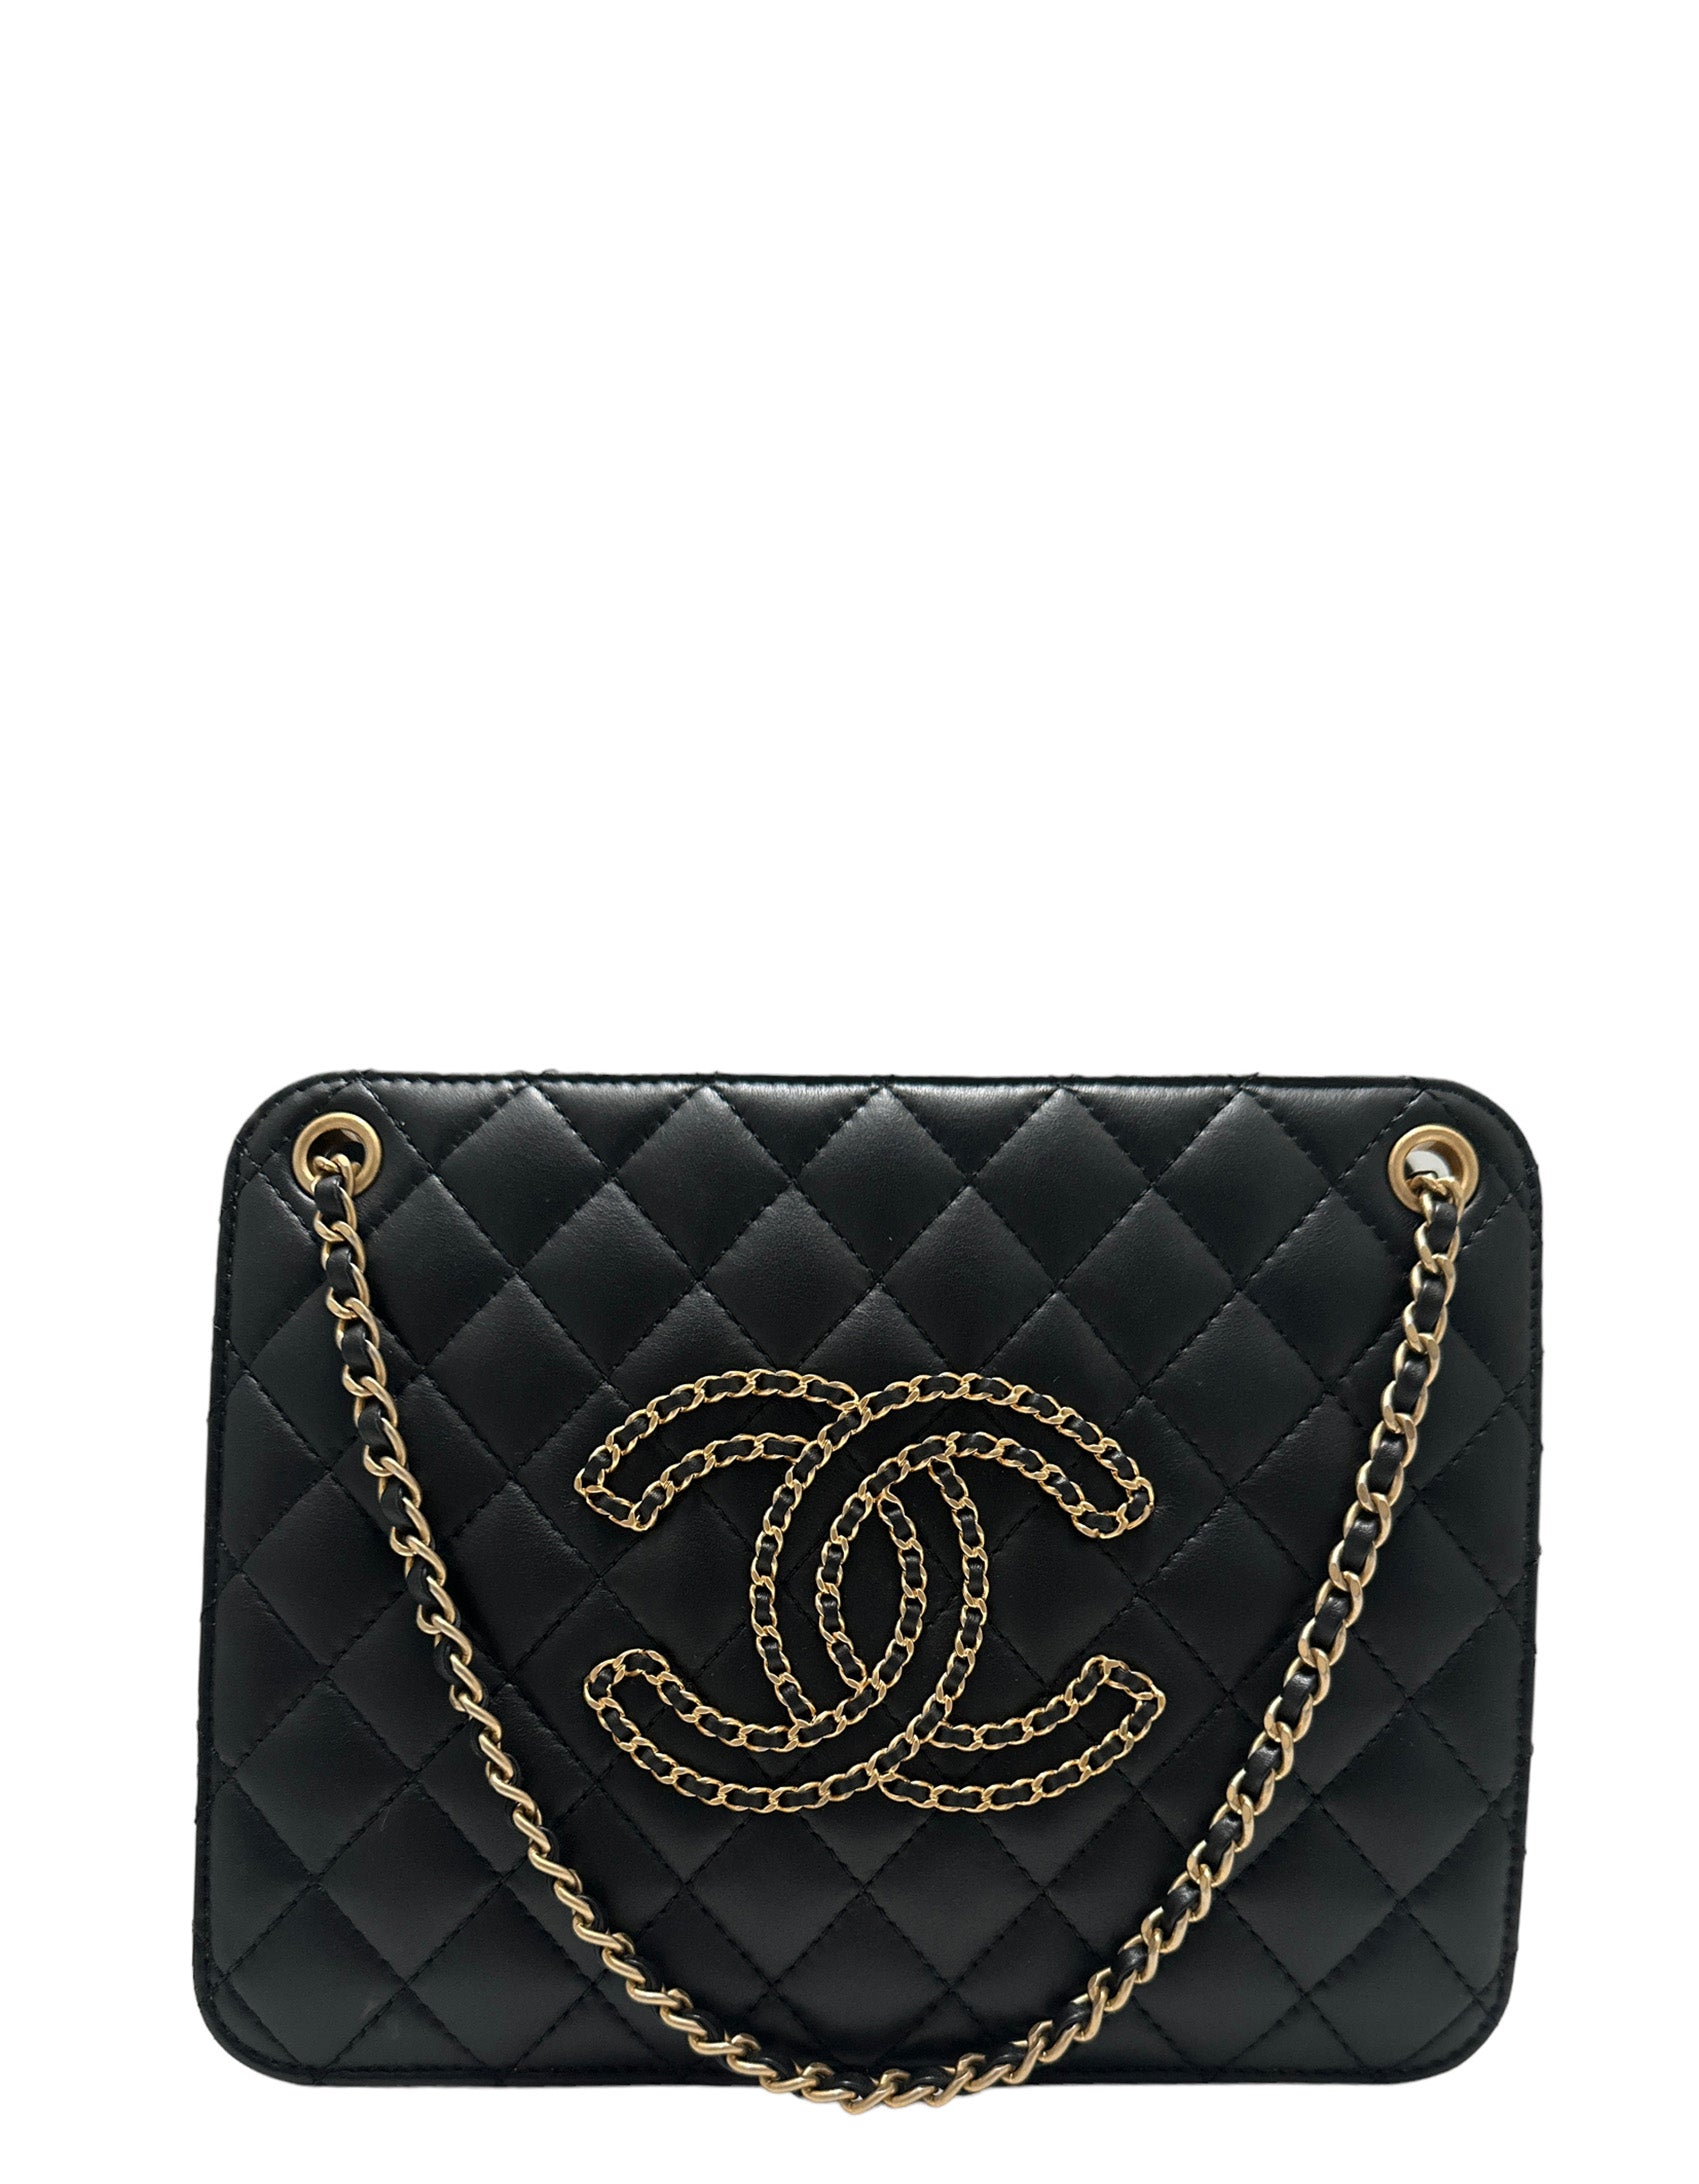 Chanel Black Calfskin Quilted Small CC Chain Accordion Tote Bag